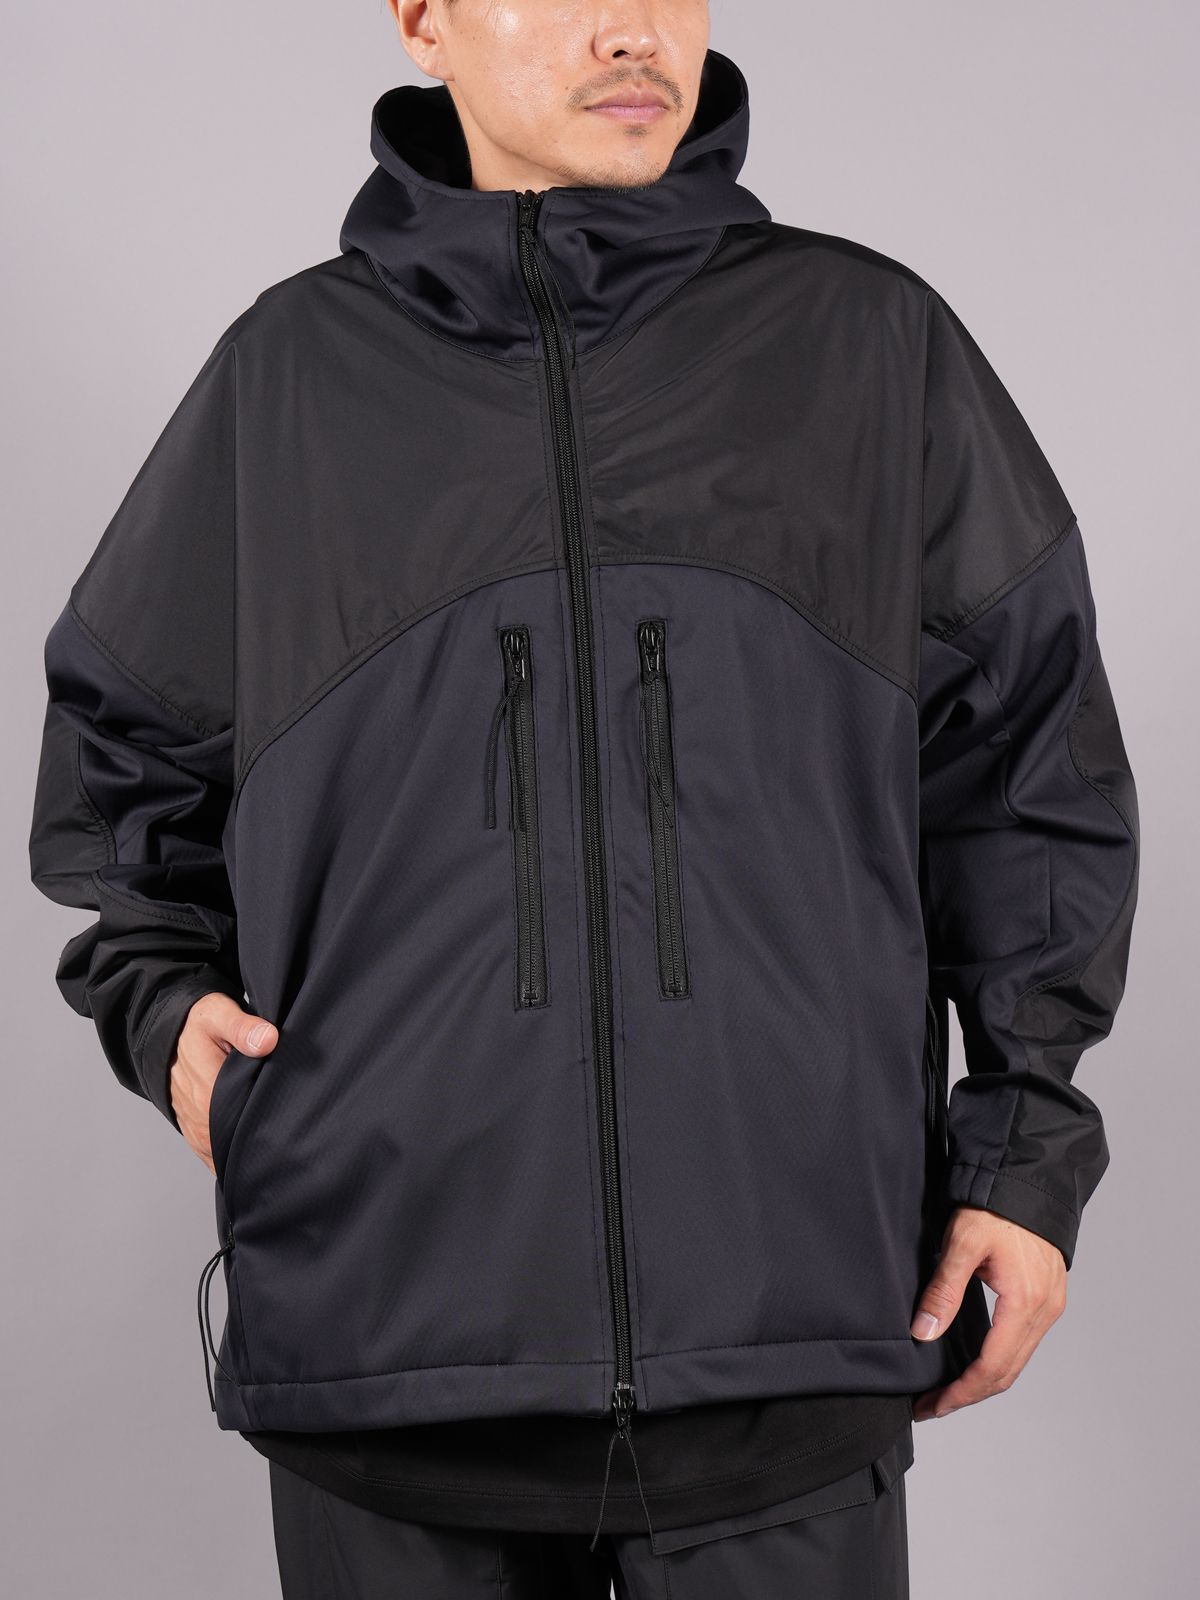 D-VEC - 【ラスト1点】 WINDSTOPPER PRODUCTS BY GORE-TEX LABS